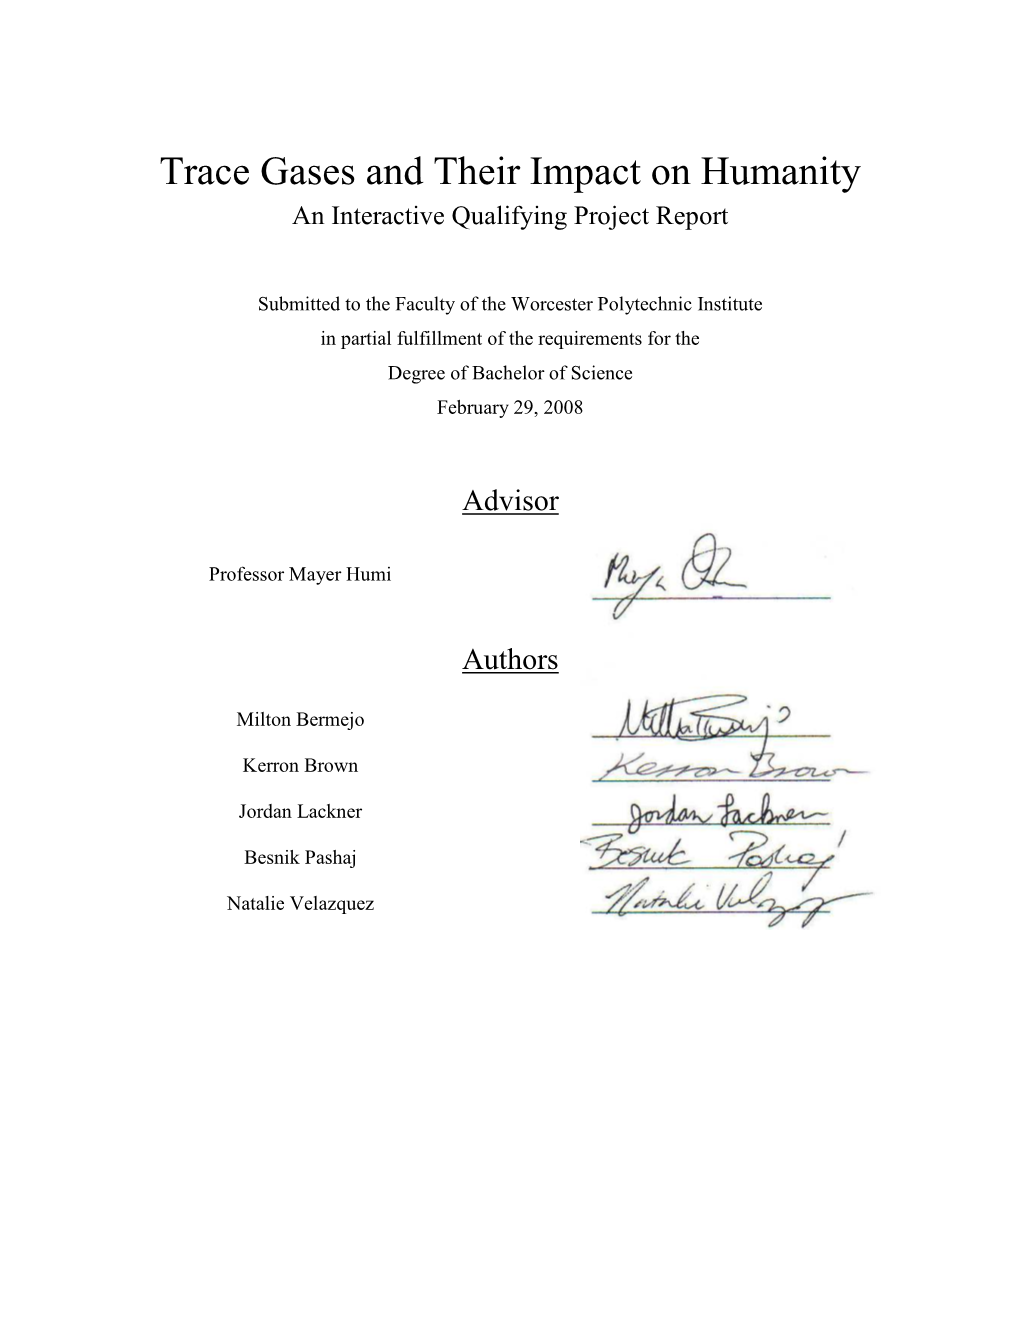 Trace Gases and Their Impact on Humanity an Interactive Qualifying Project Report